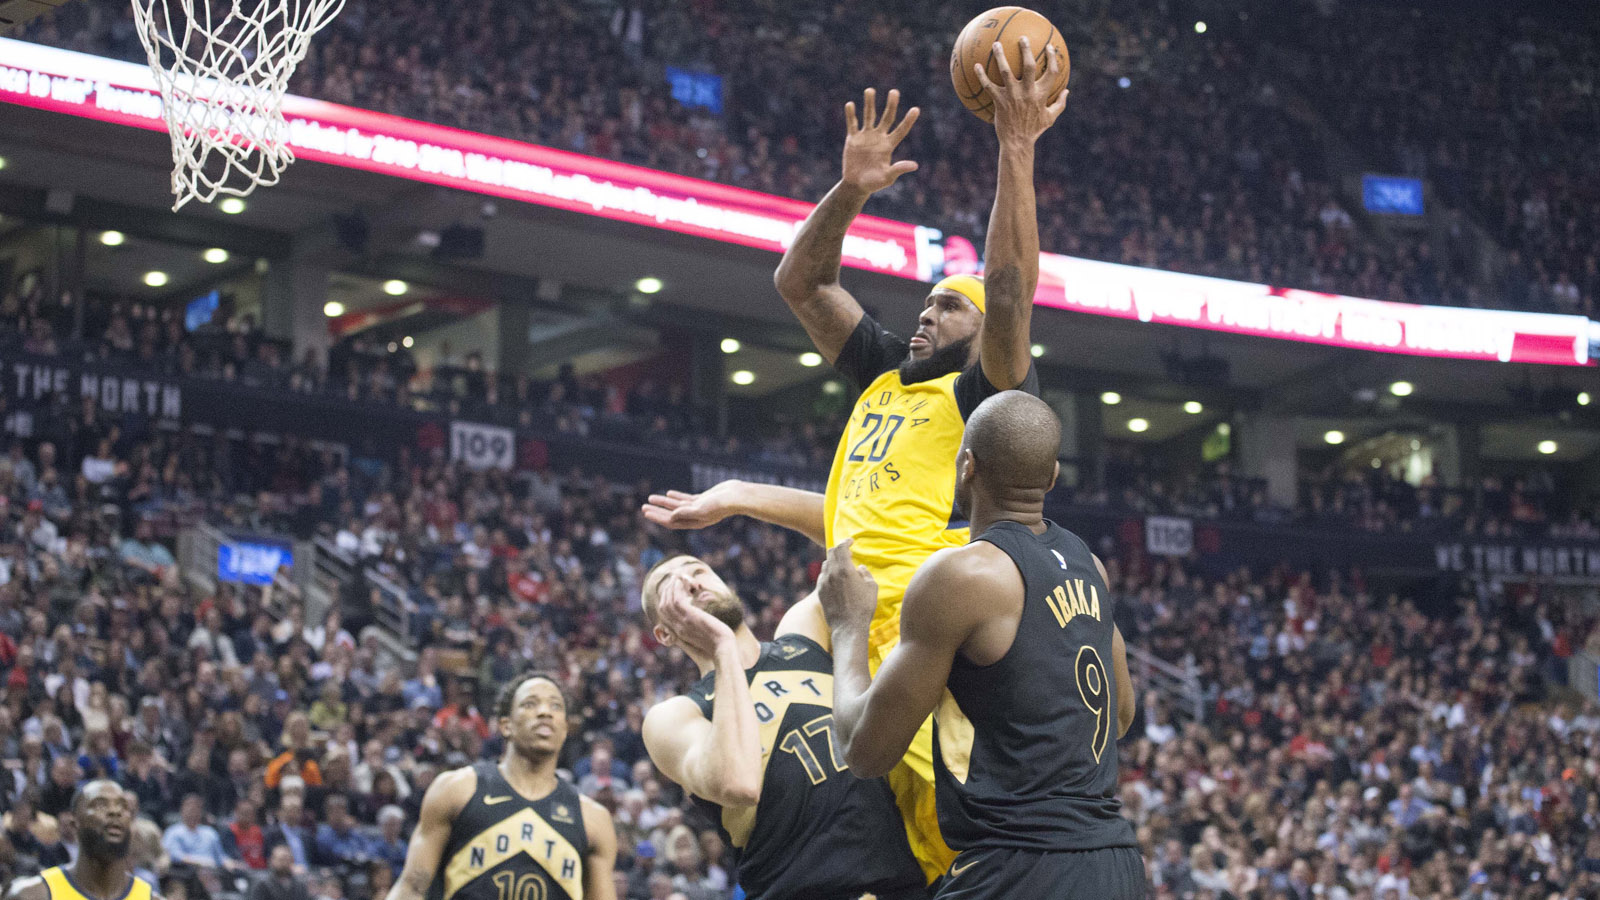 Pacers can't catch up after rough first quarter, fall 92-73 to Raptors